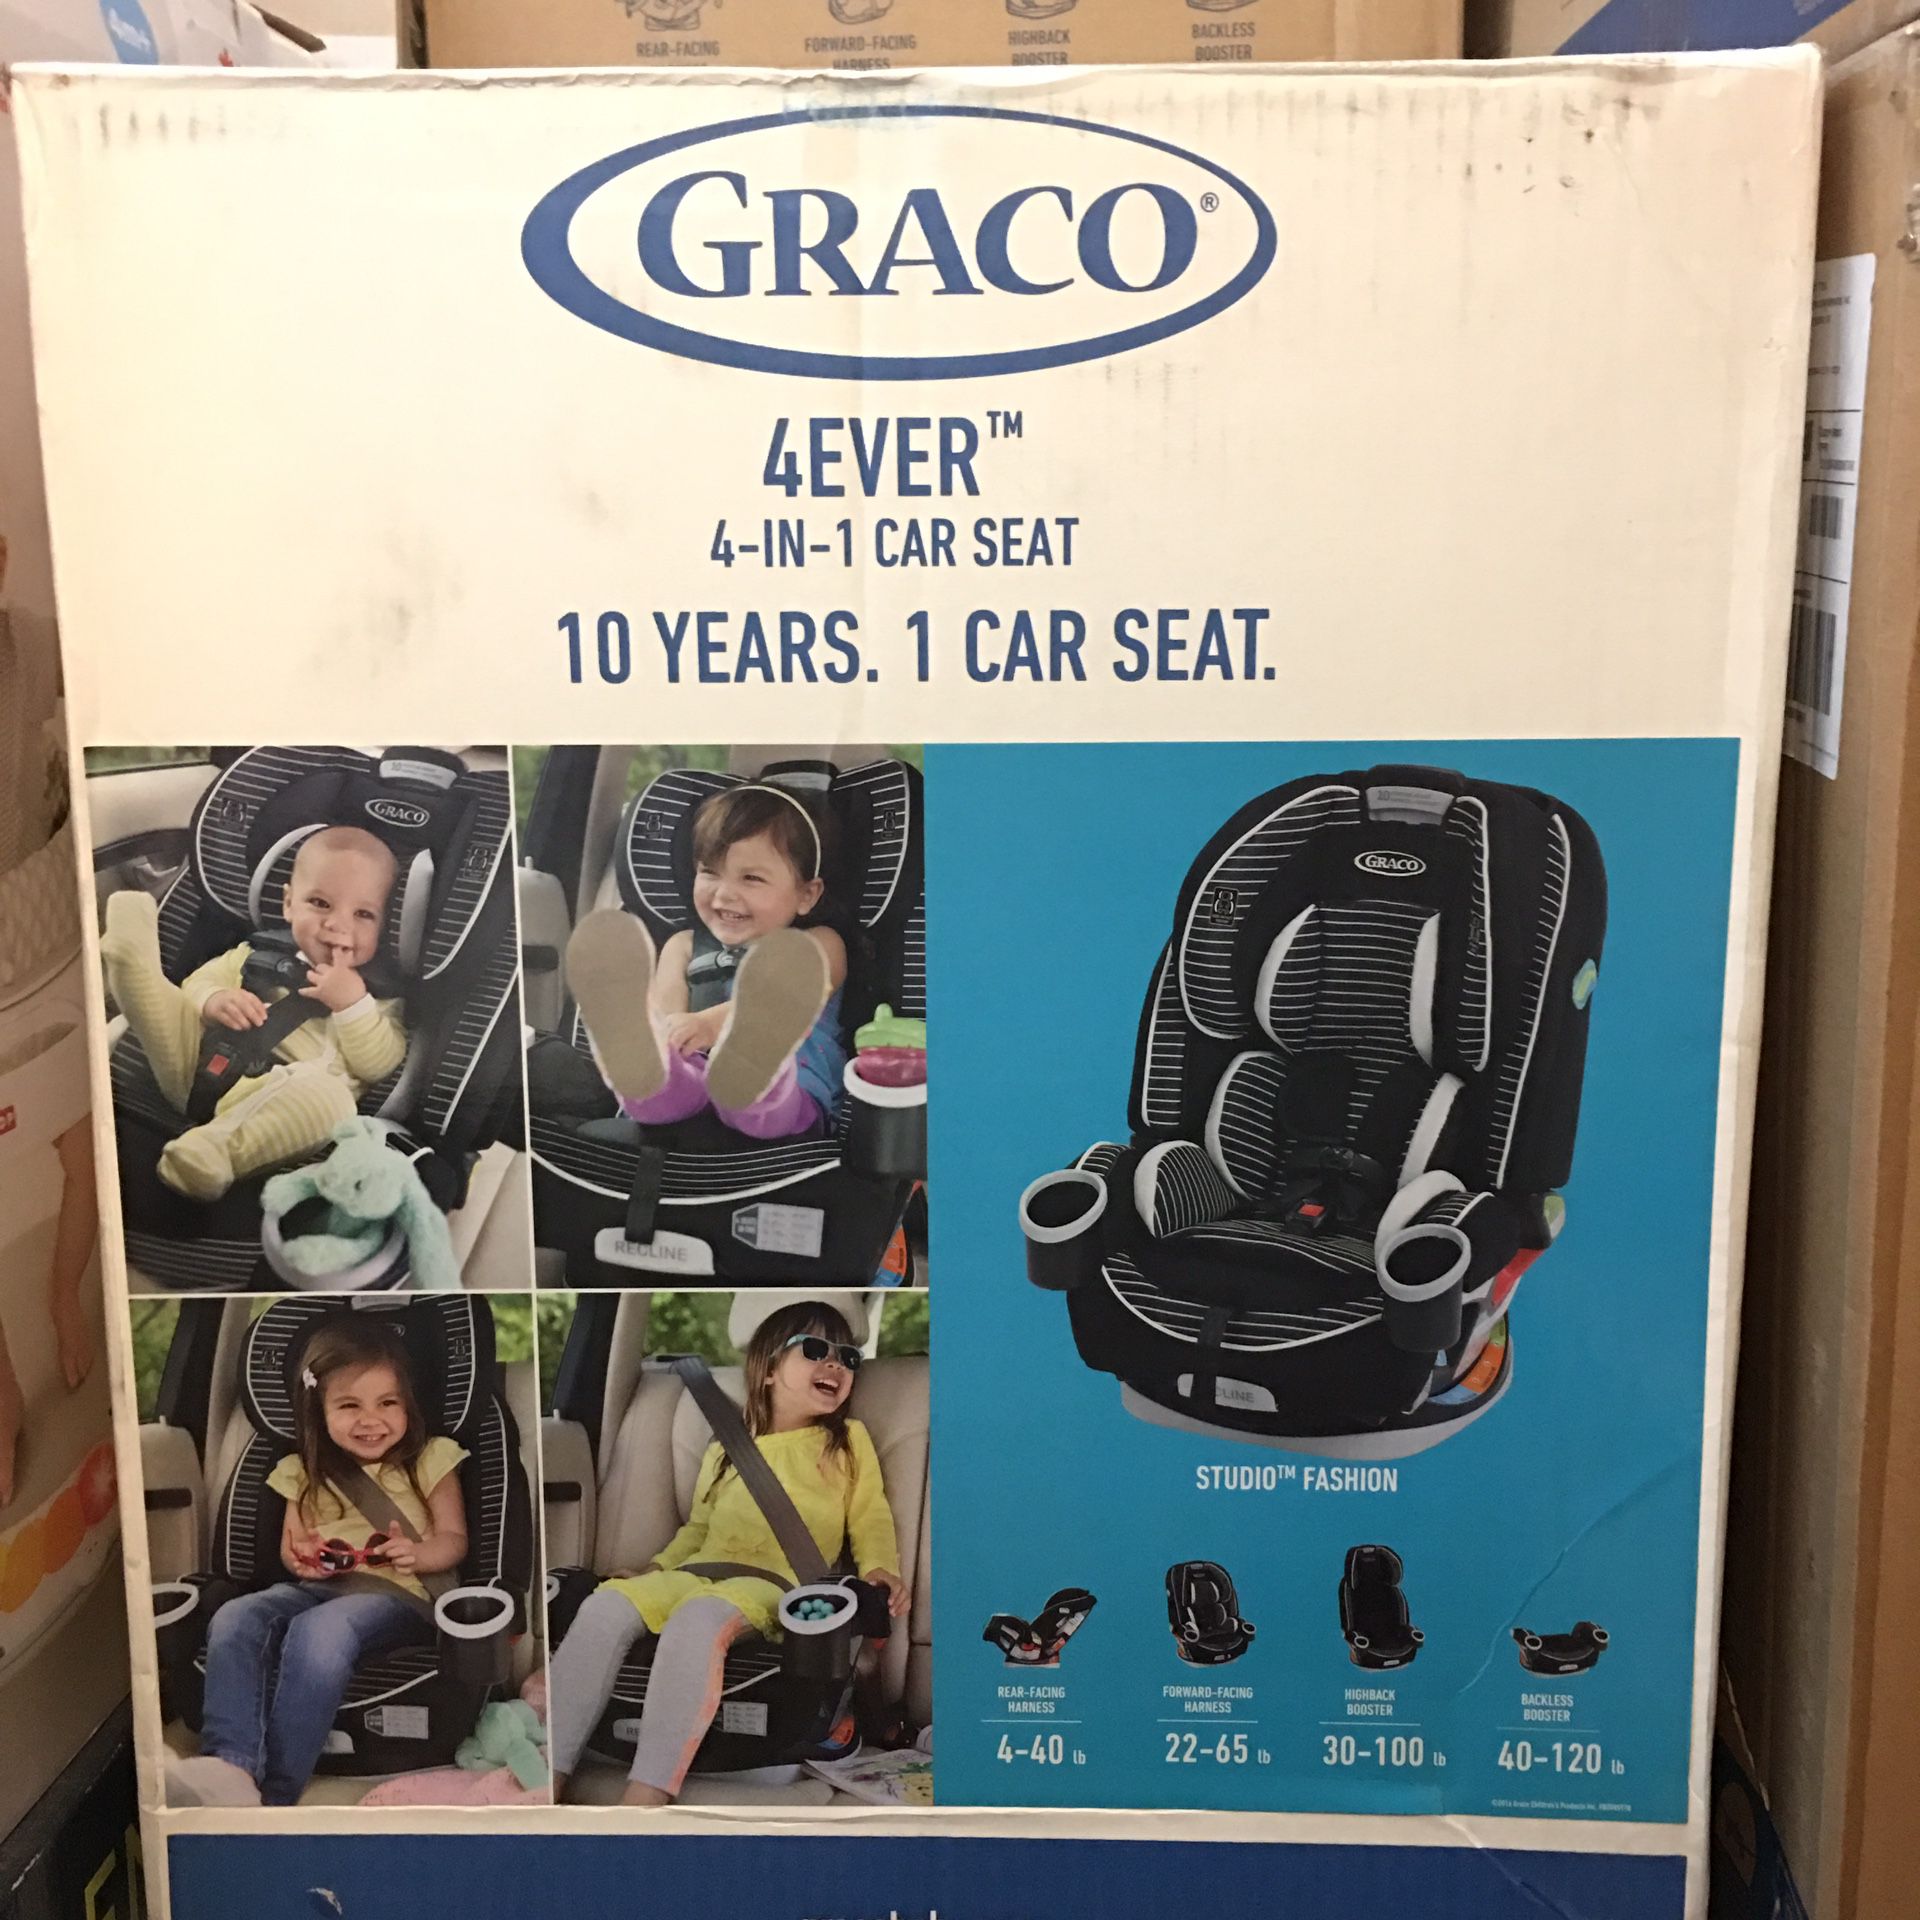 Graco 4Ever 4 in 1 baby car seat - New